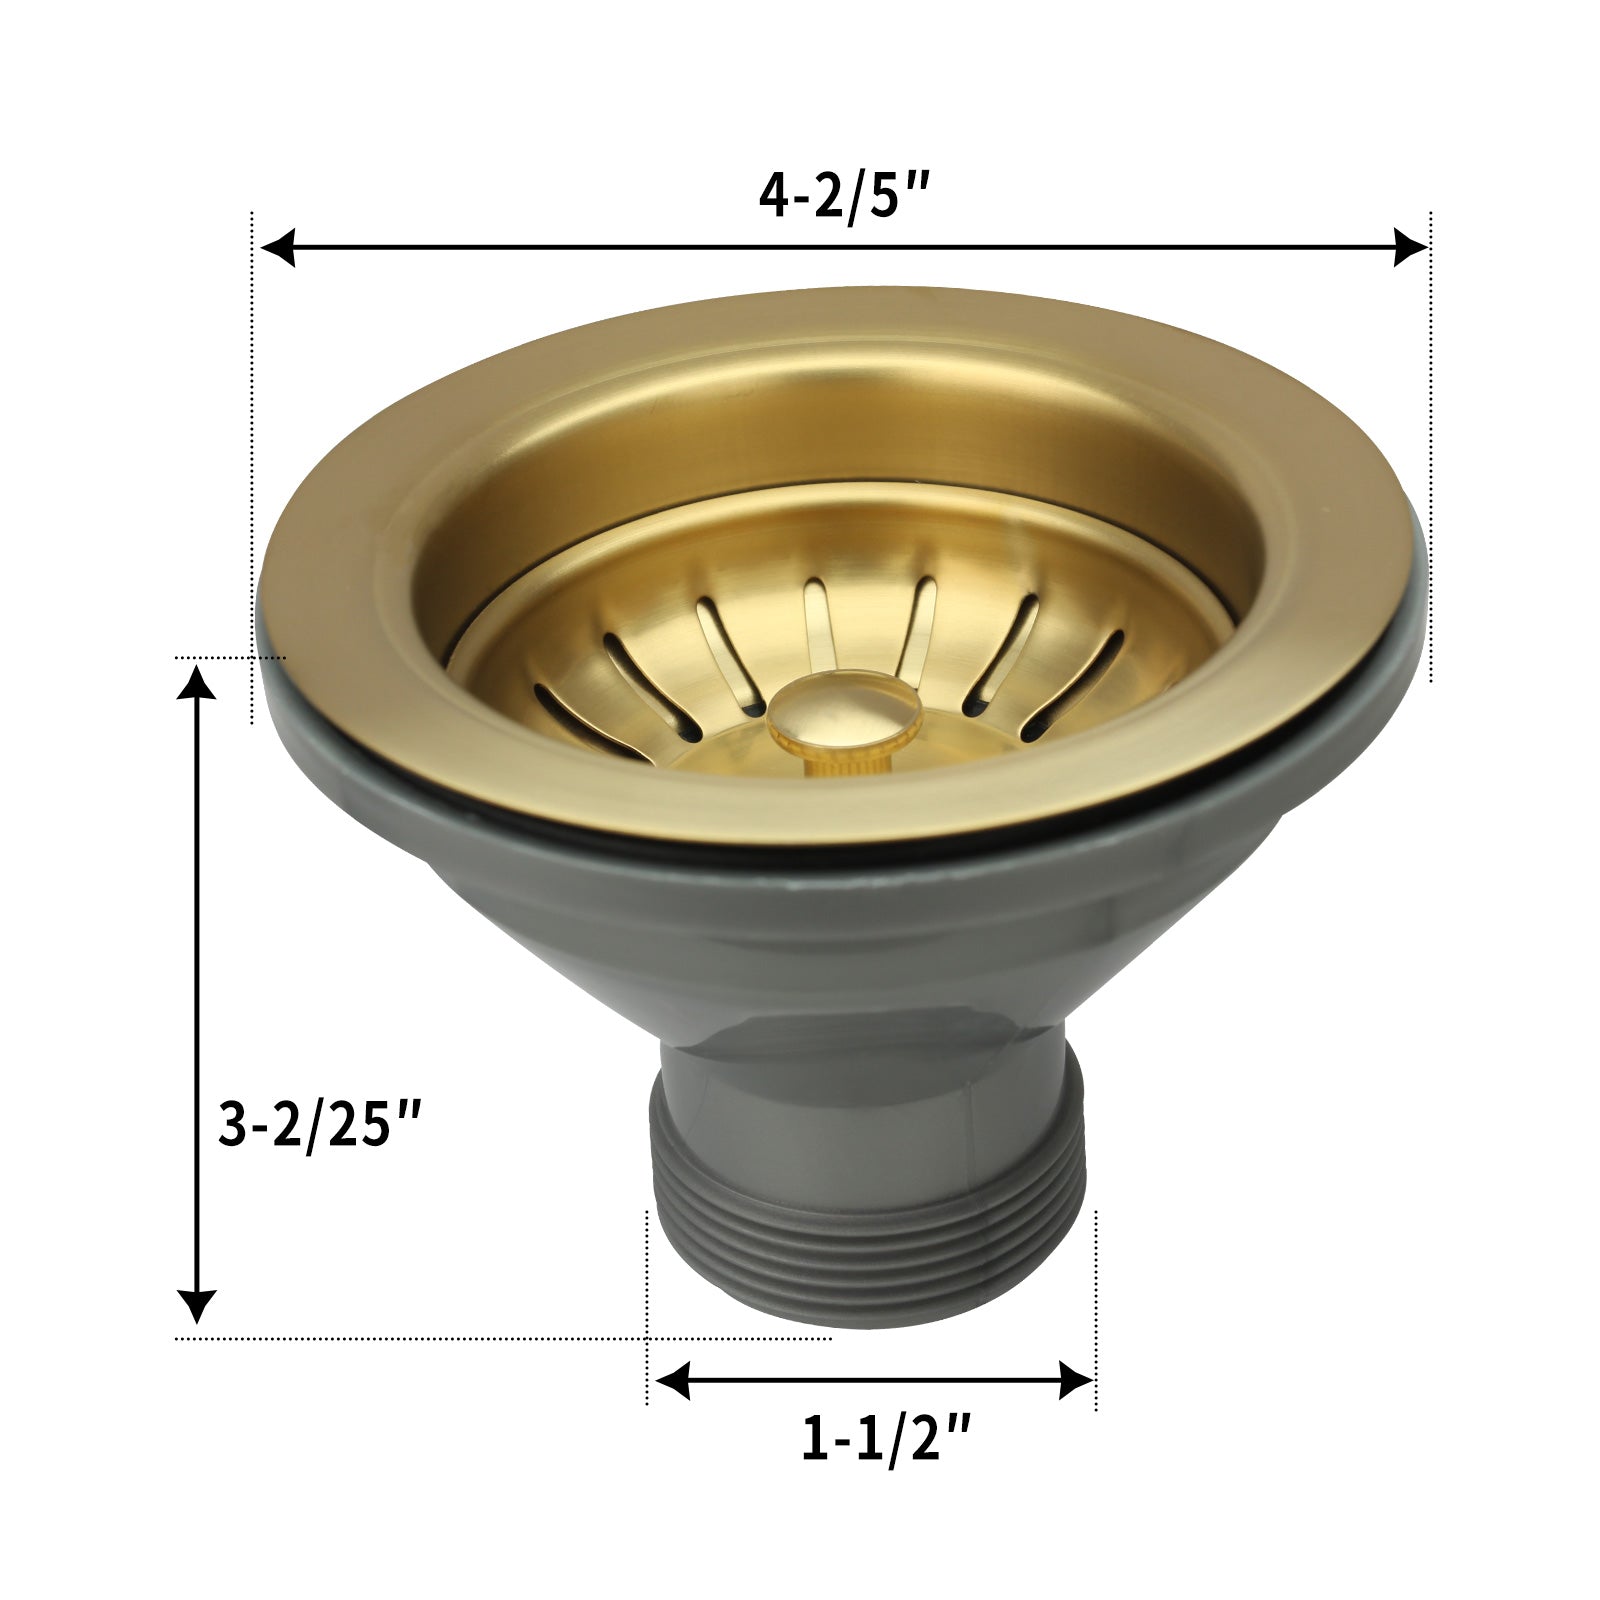 Brushed Gold Kitchen Sink Stopper Replacement for 3-1/2 Inch Standard Strainer Drain - AK82102BTG